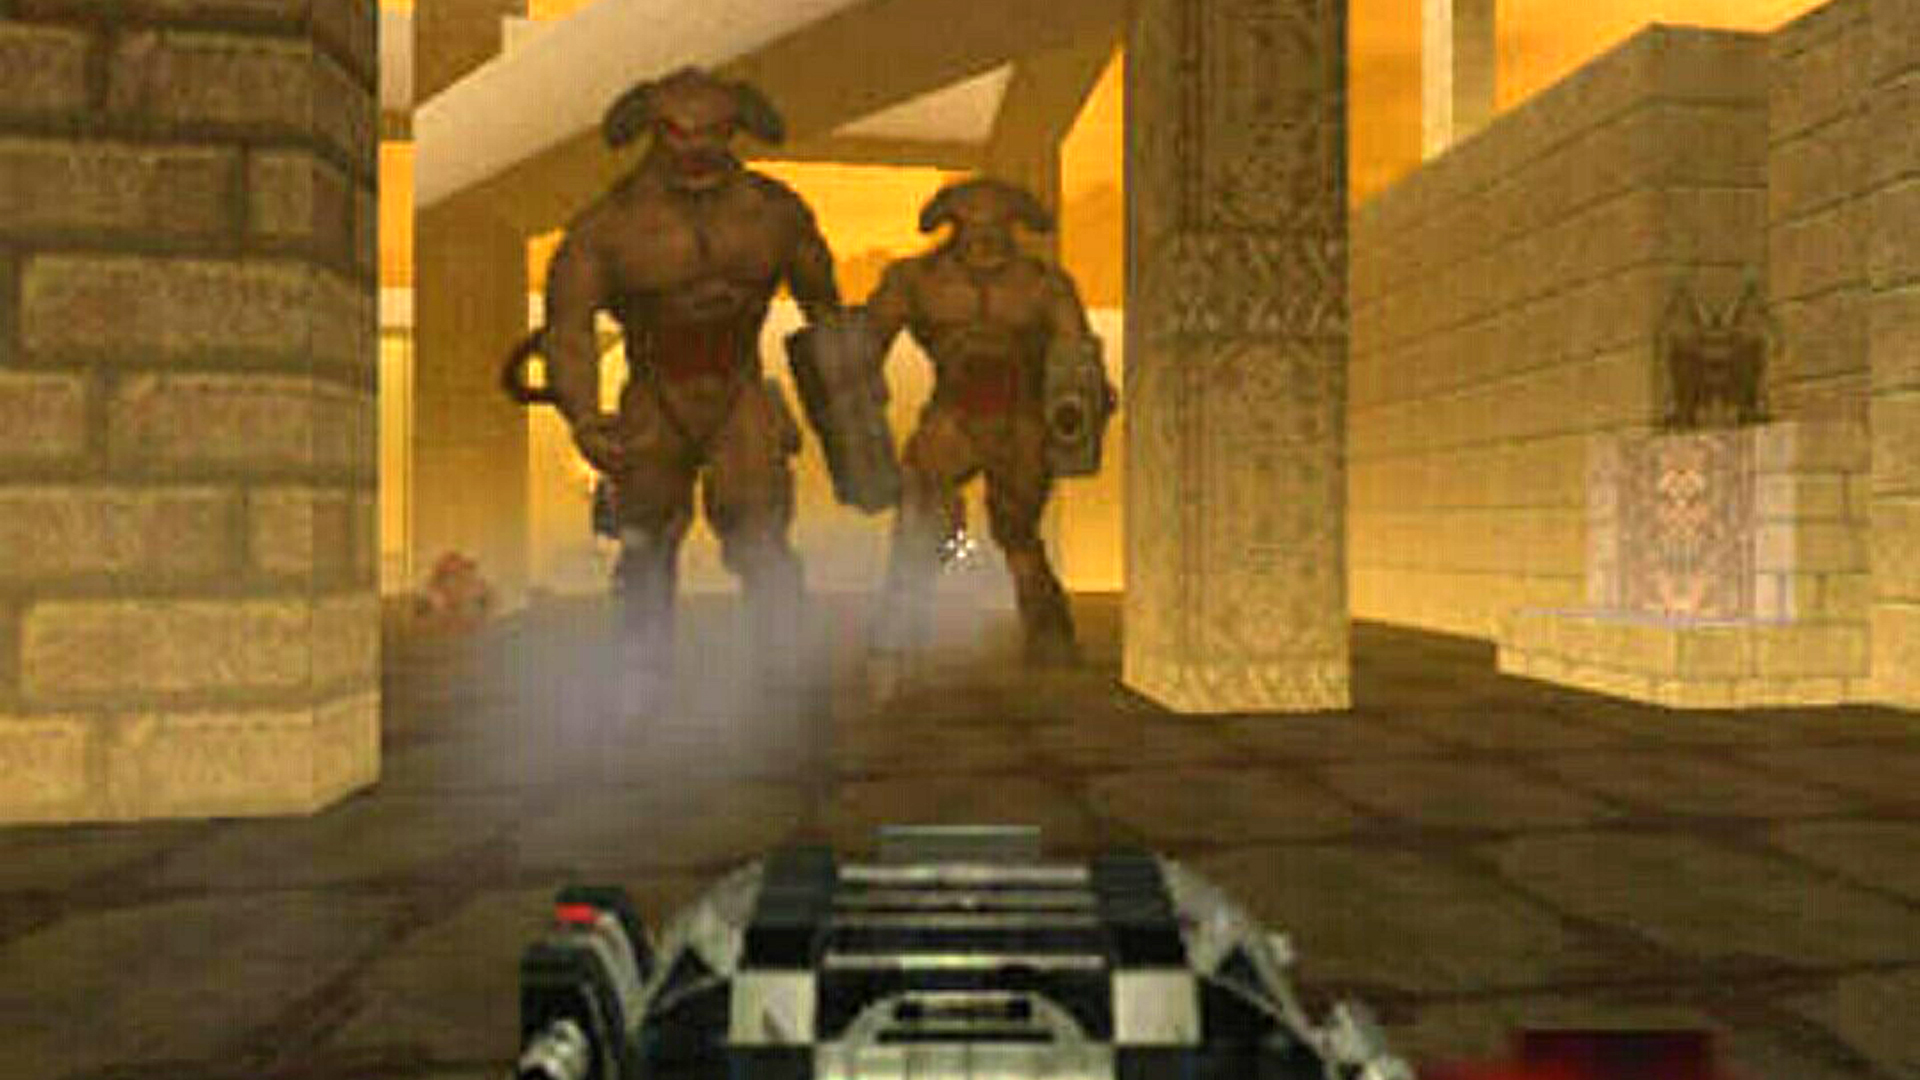 Doom 64 may get released on PC after 22 years